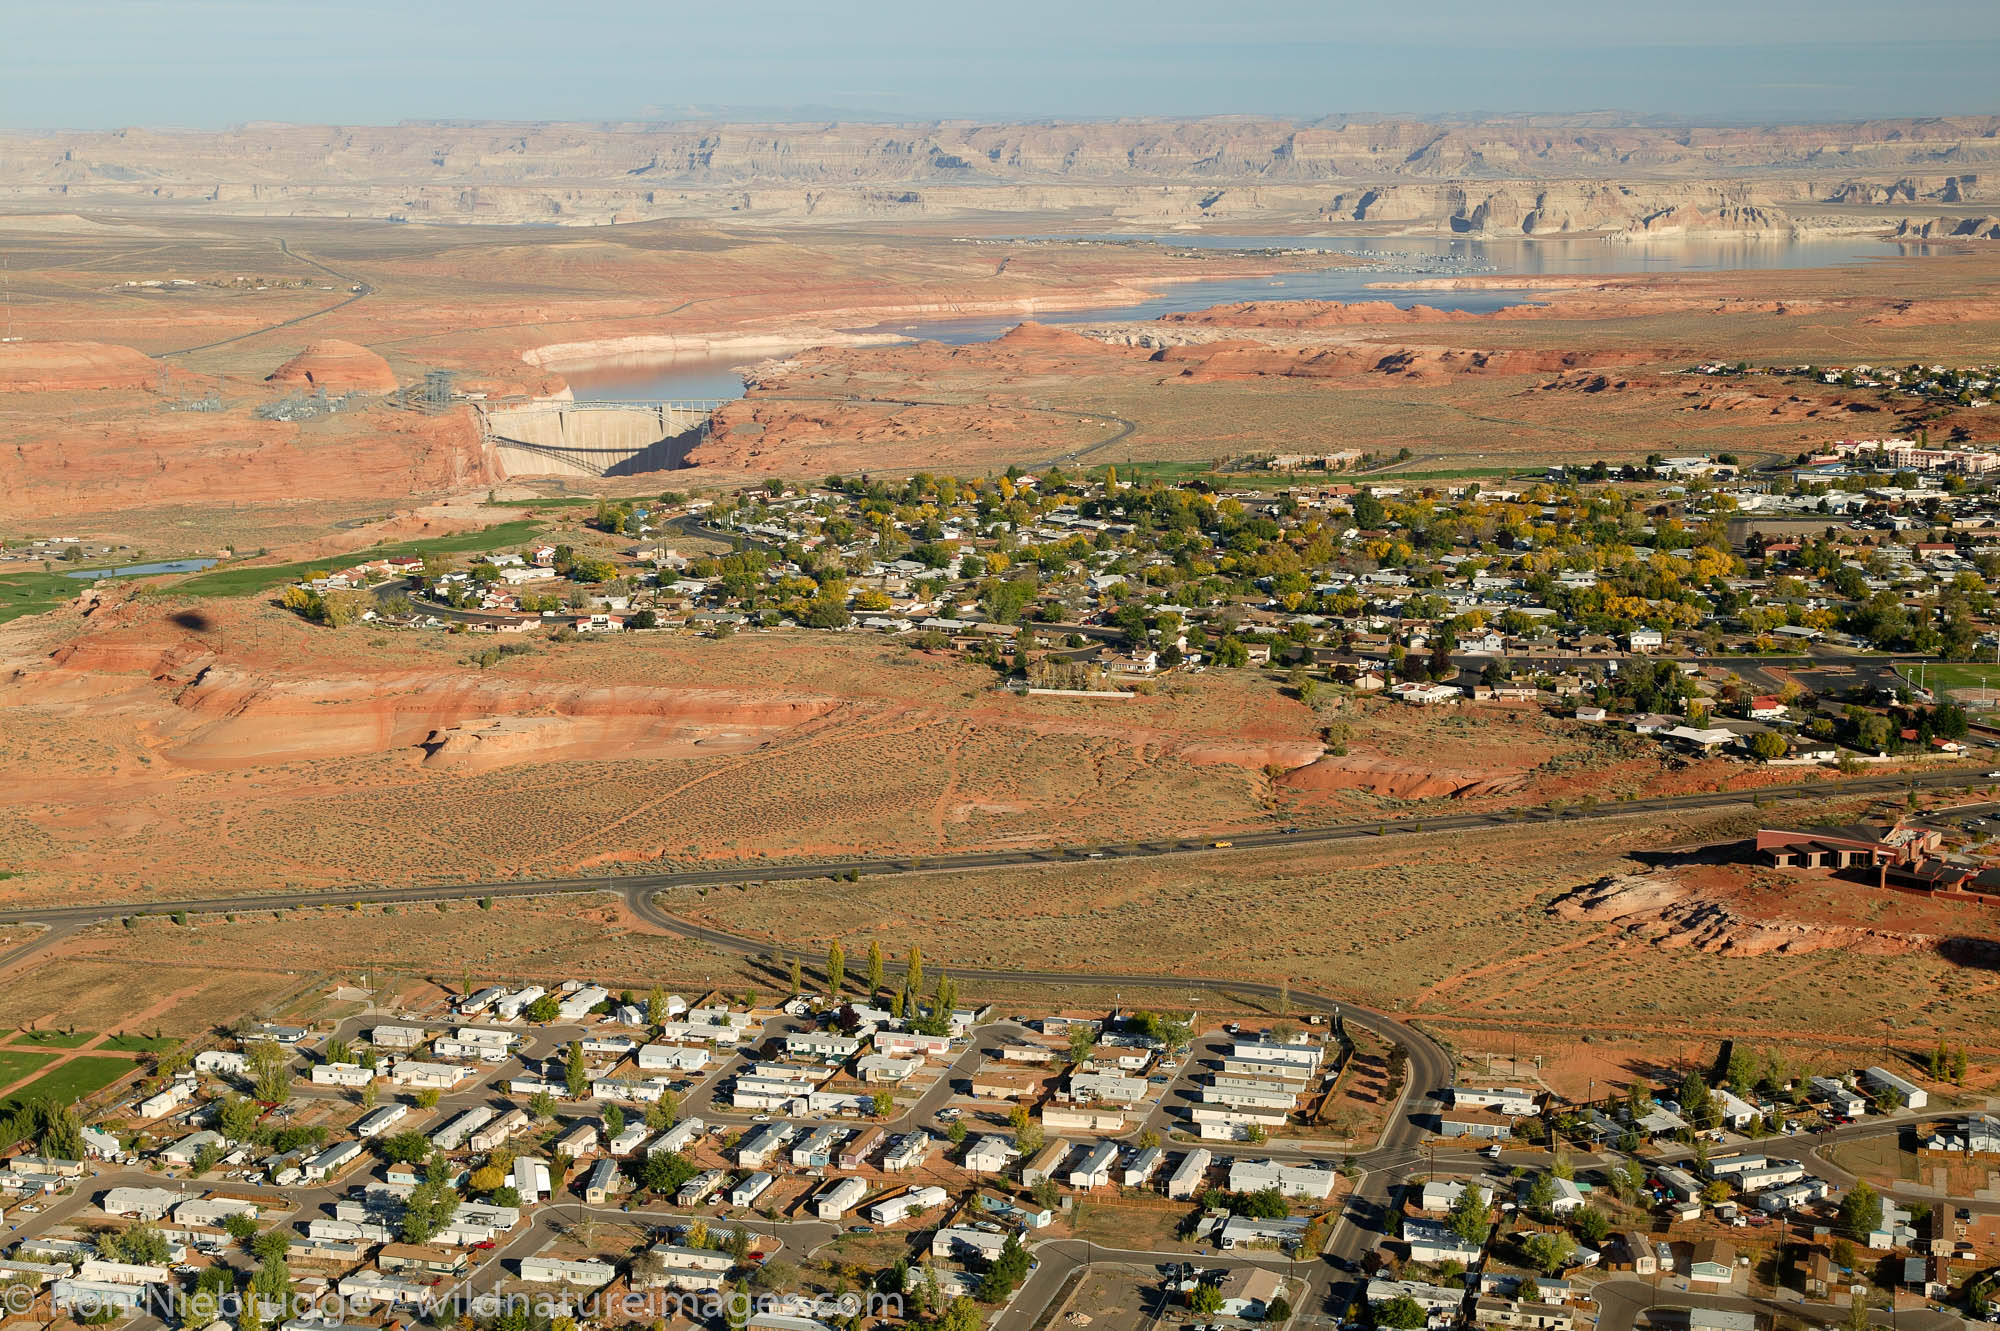 The town of Page as seen from a hot air ballon Lake Powell Balloon Regatta, Page Arizona.